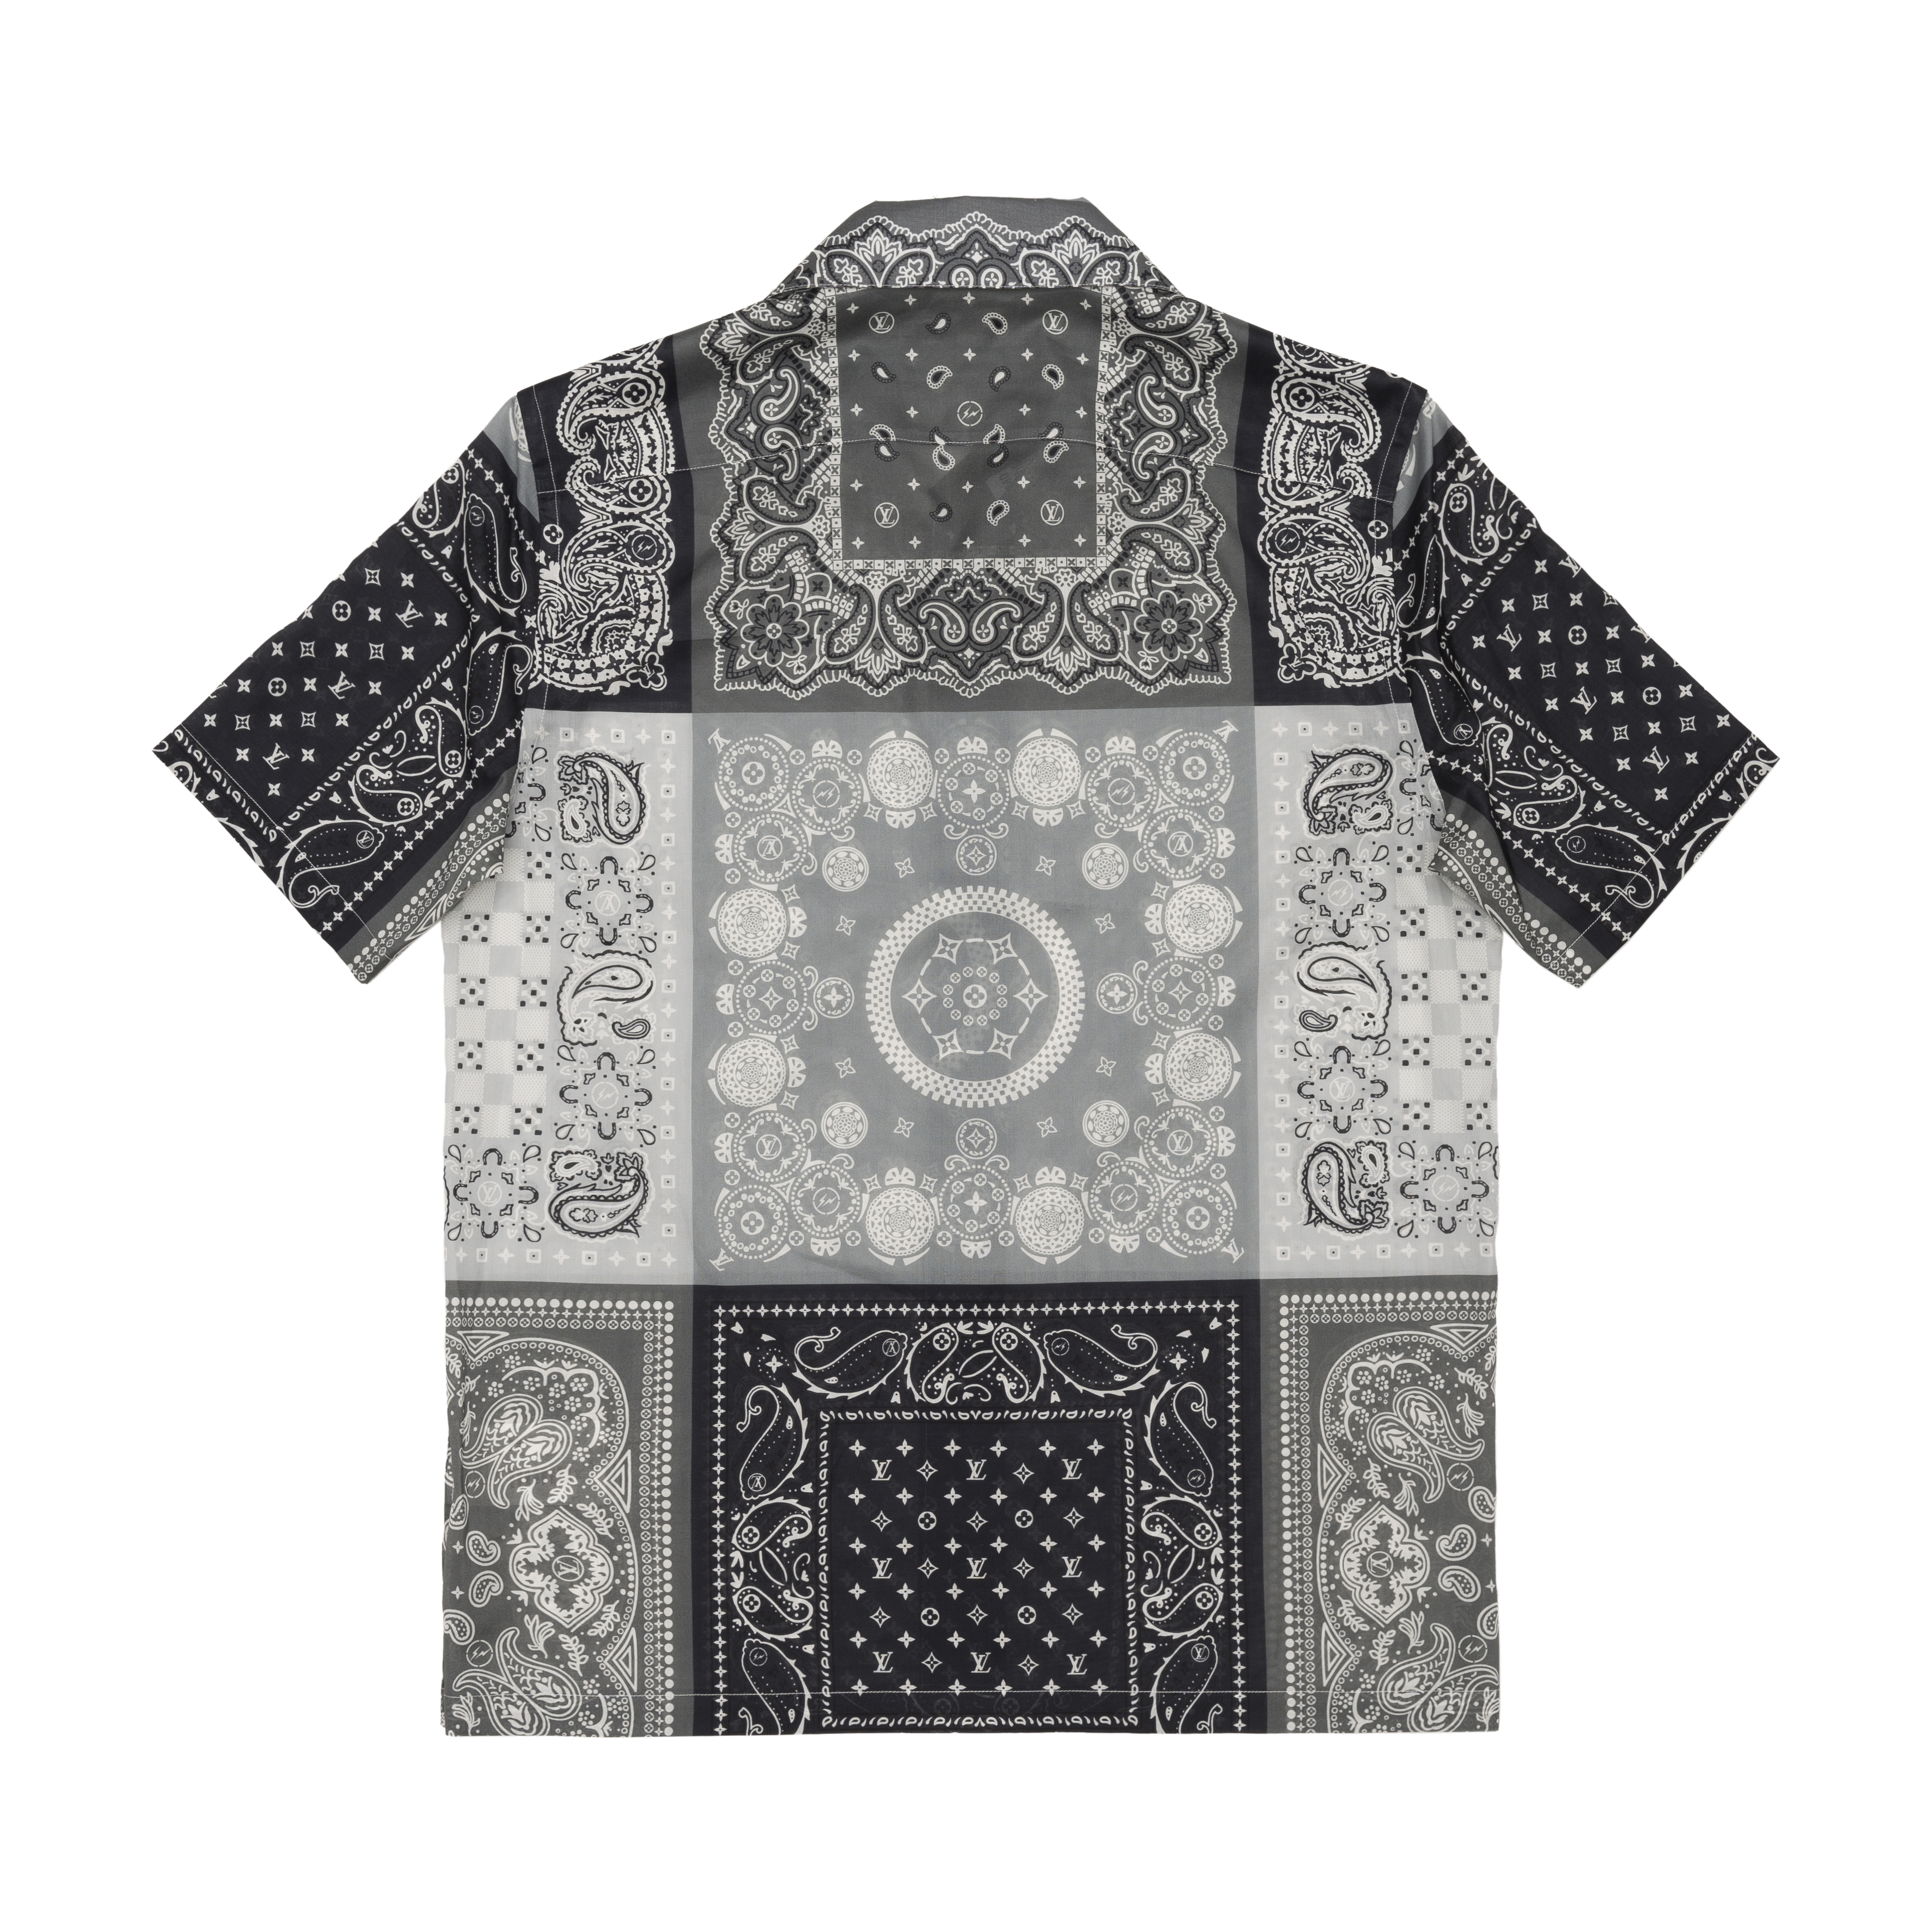 The Louis Vuitton ‘Hawaiian Shirt’ at Dover Street Market / RoC Staff / Ring of Colour